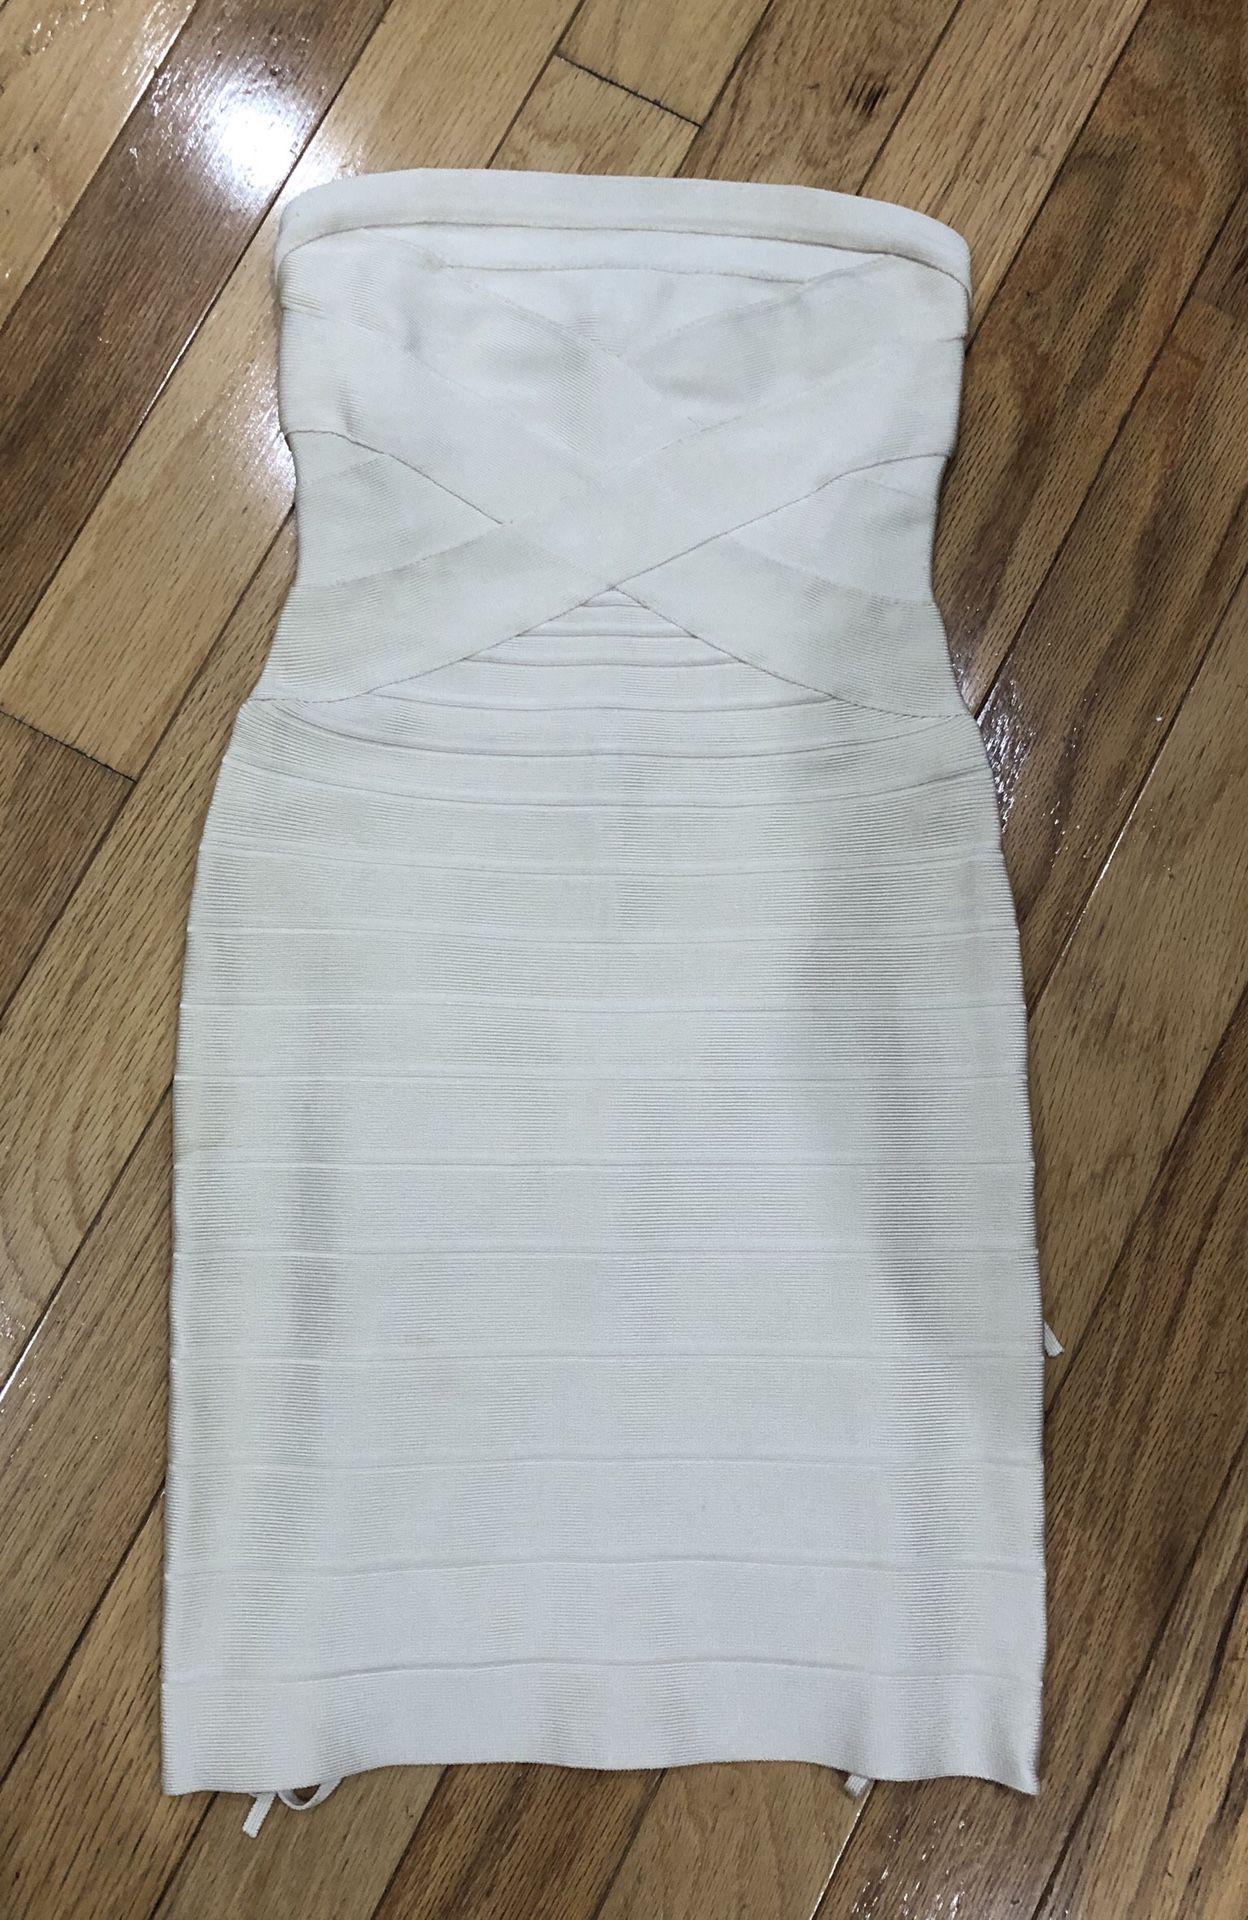 Herve Leger dress in size xs